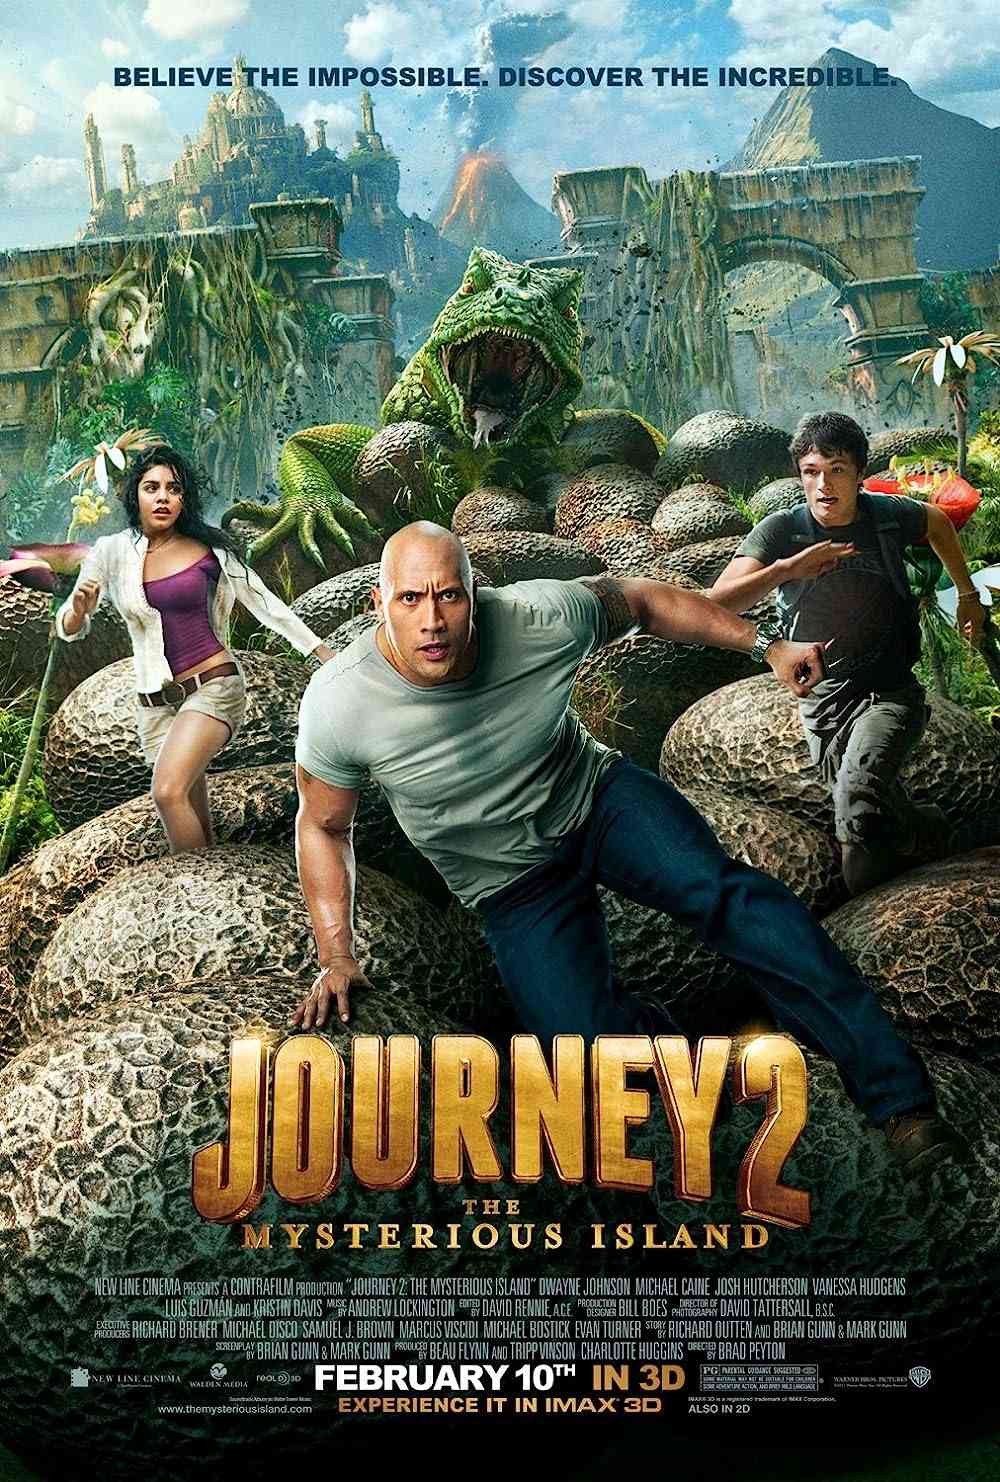 FULL MOVIE: Journey 2: The Mysterious Island (2012) [Action]